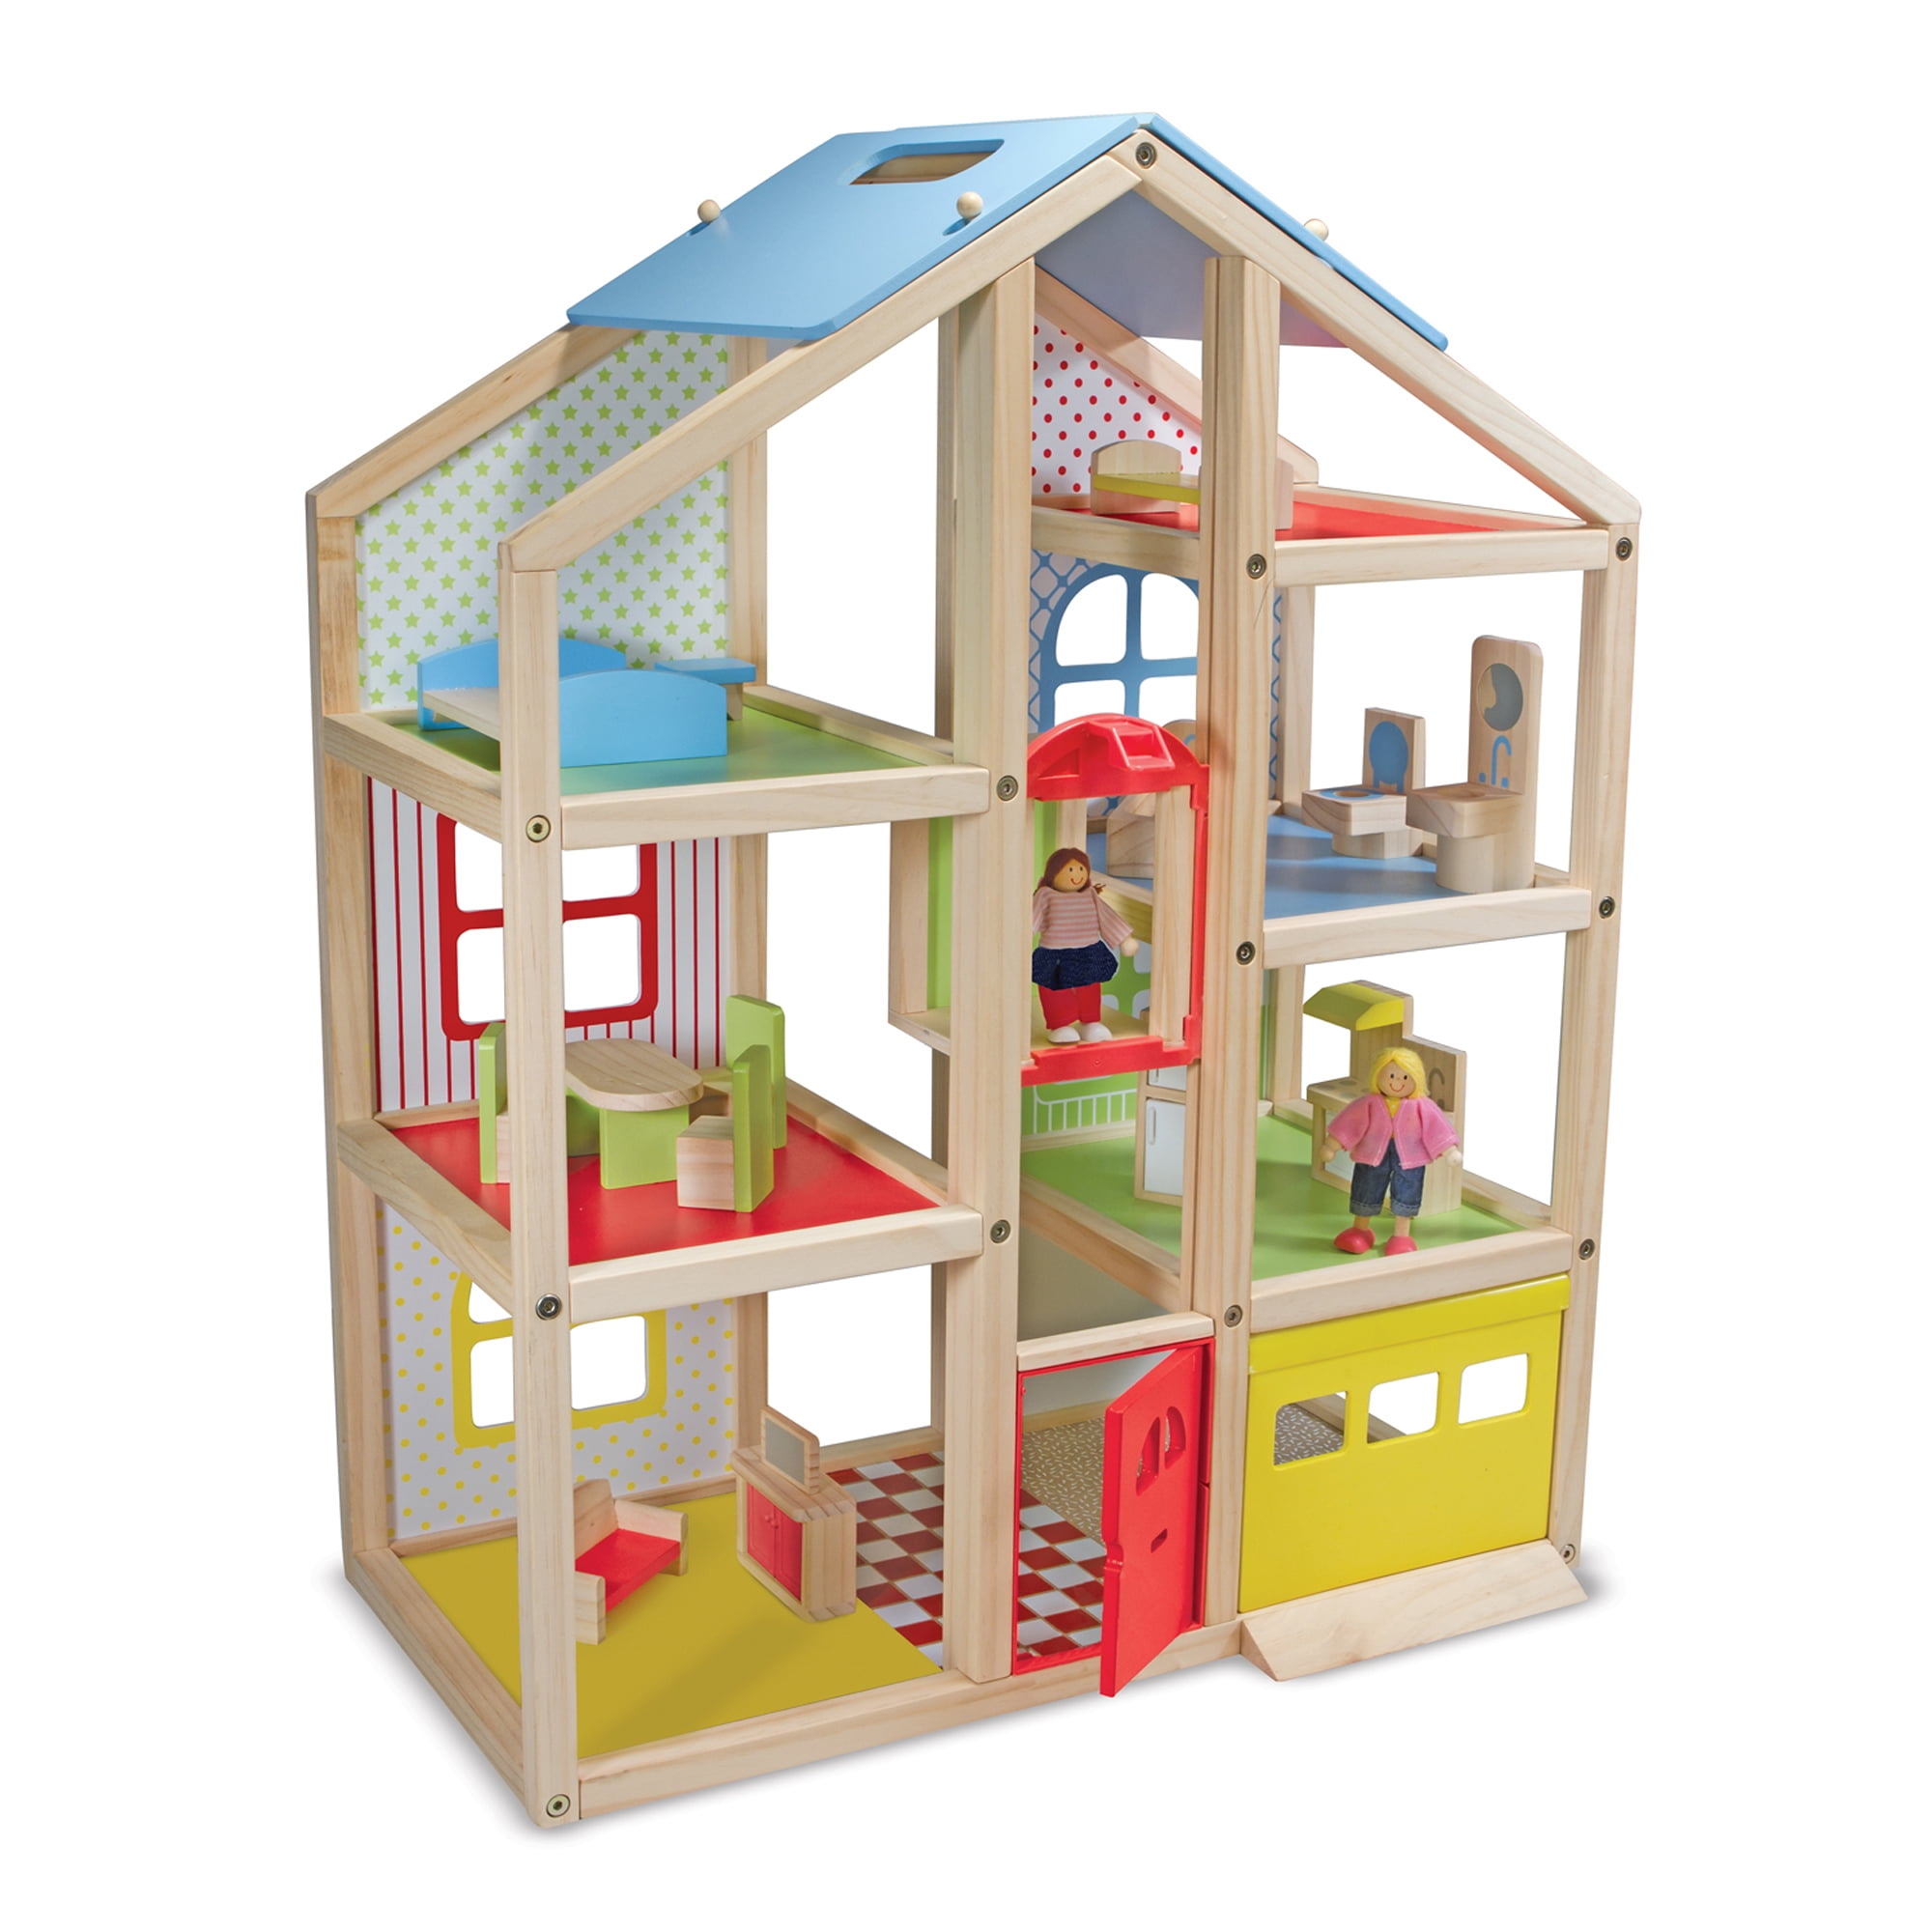 Details about   Melissa & Doug Fold and Go Wooden Dollhouse With 2 Dolls and Wooden Furniture